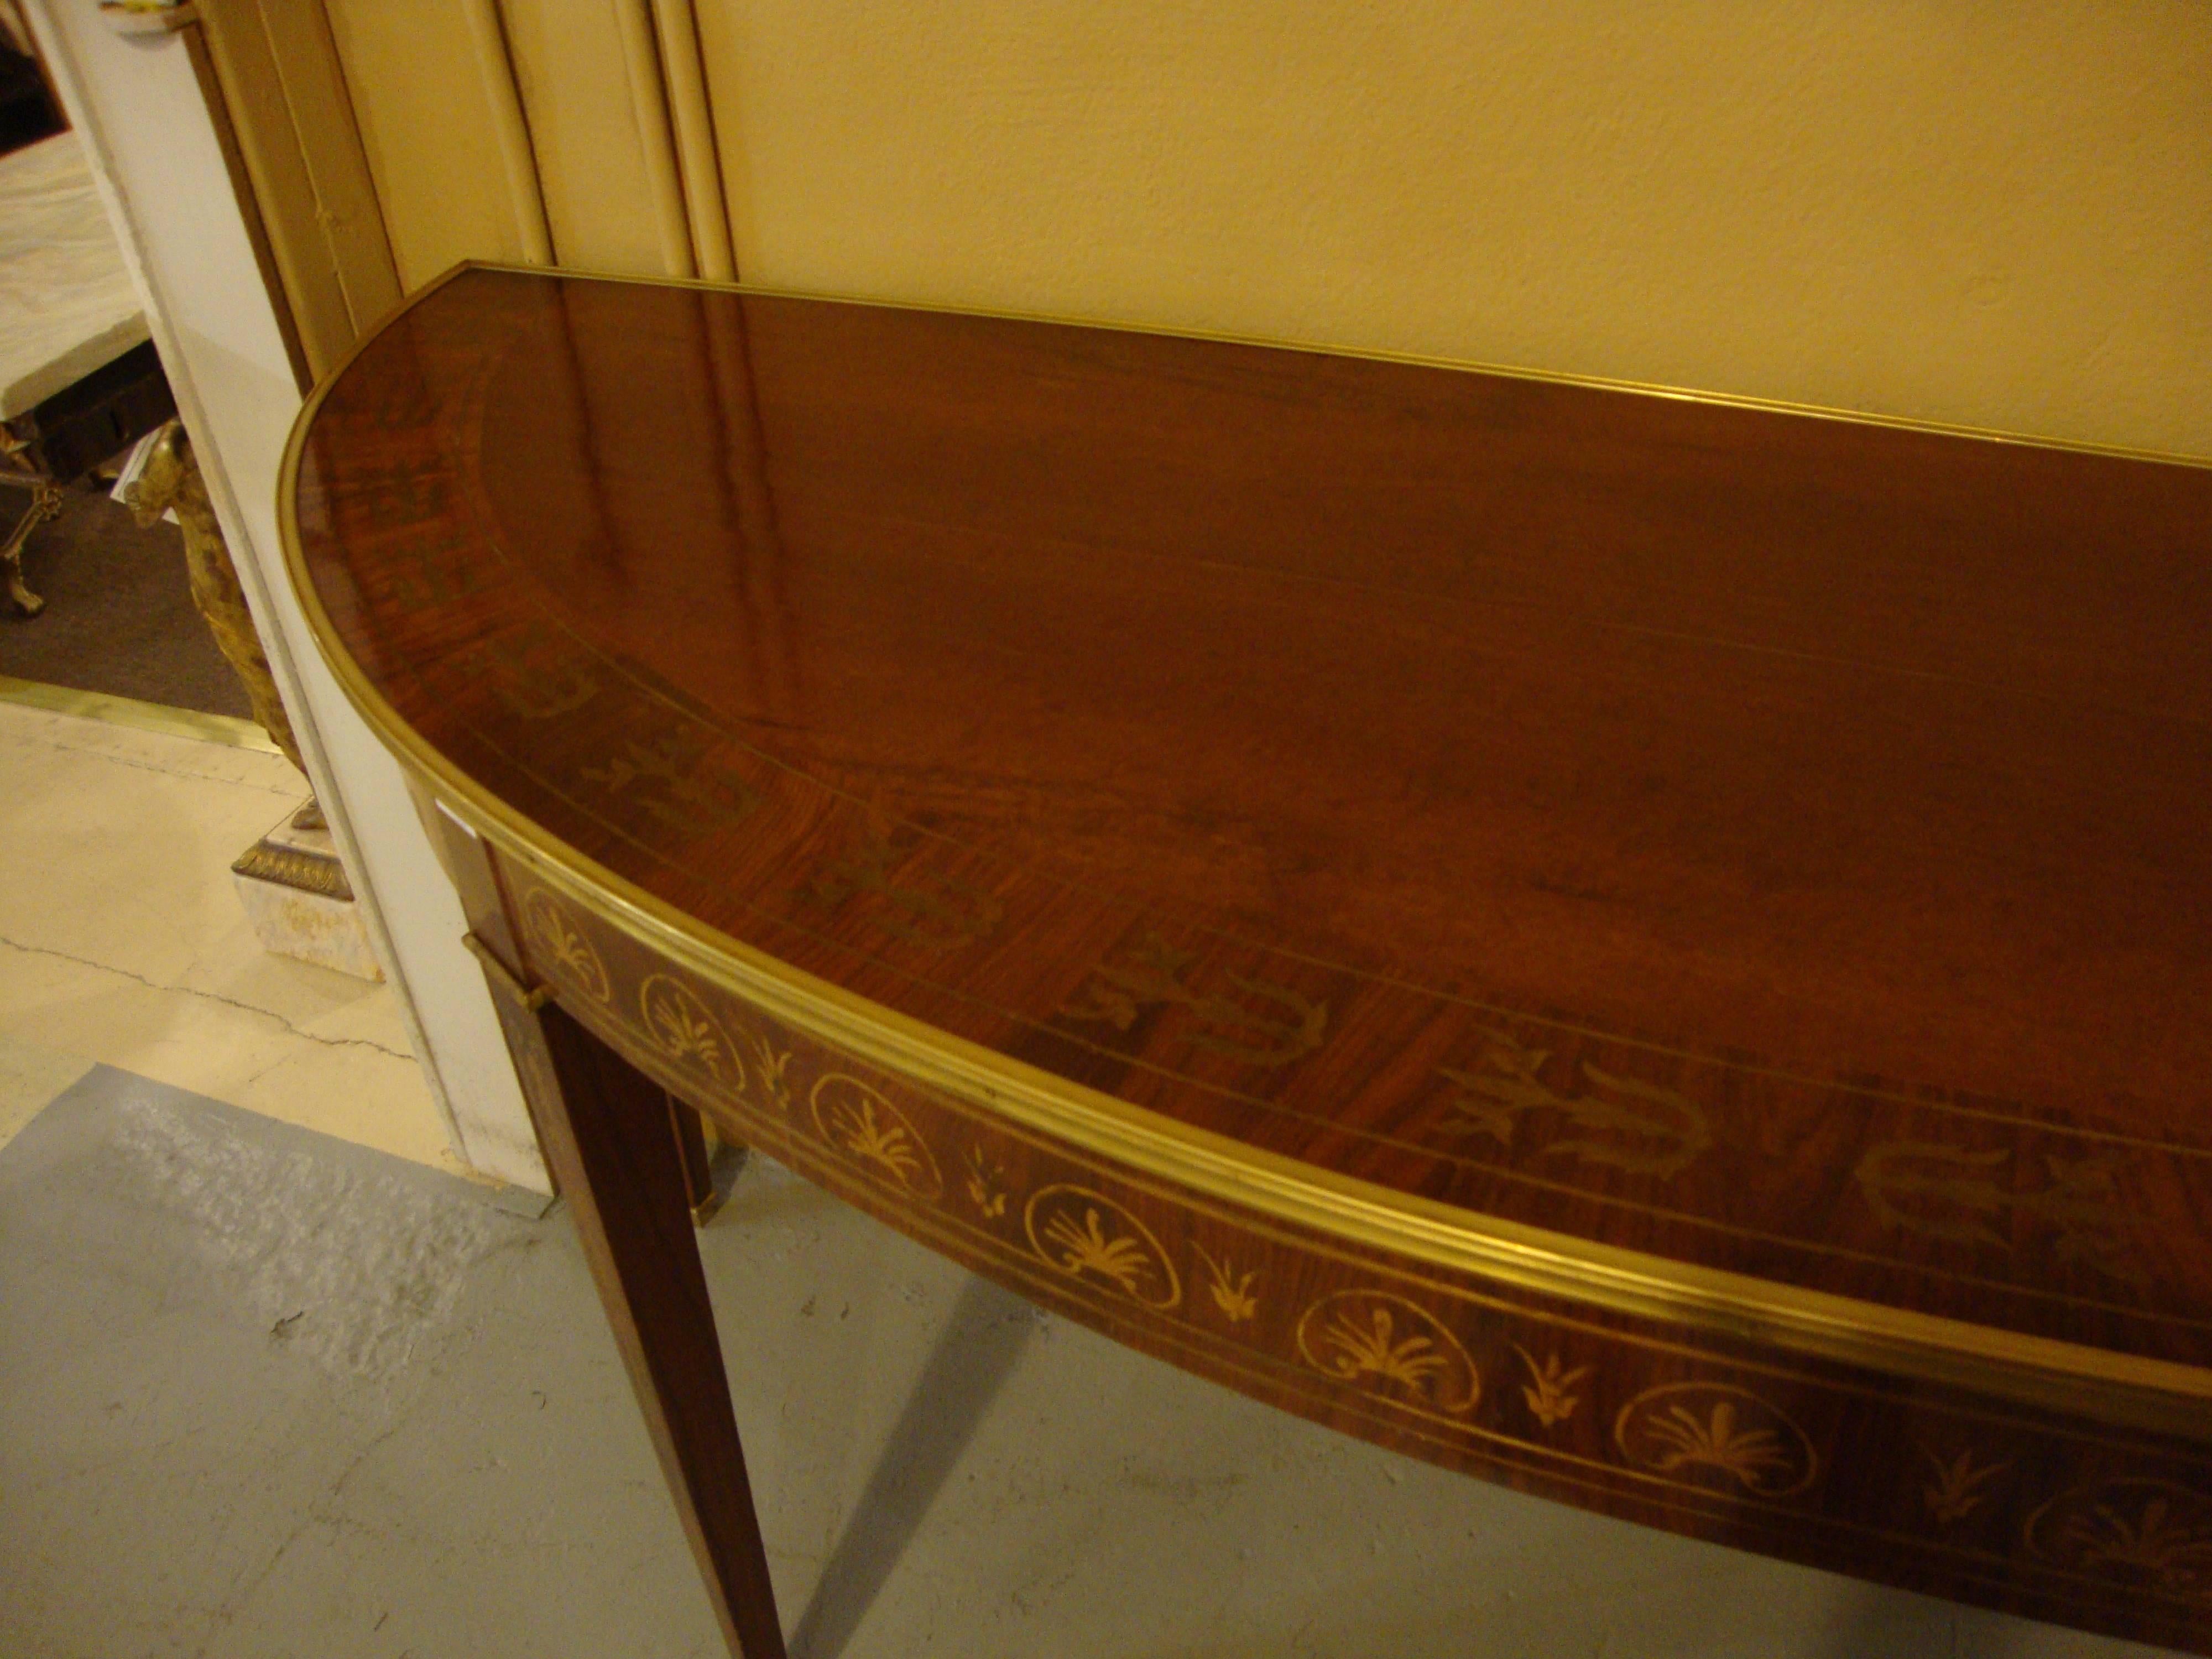 Neoclassical, Demilune Console Tables, Brown Wood, Brass Inlay, Europe, 1970s For Sale 2